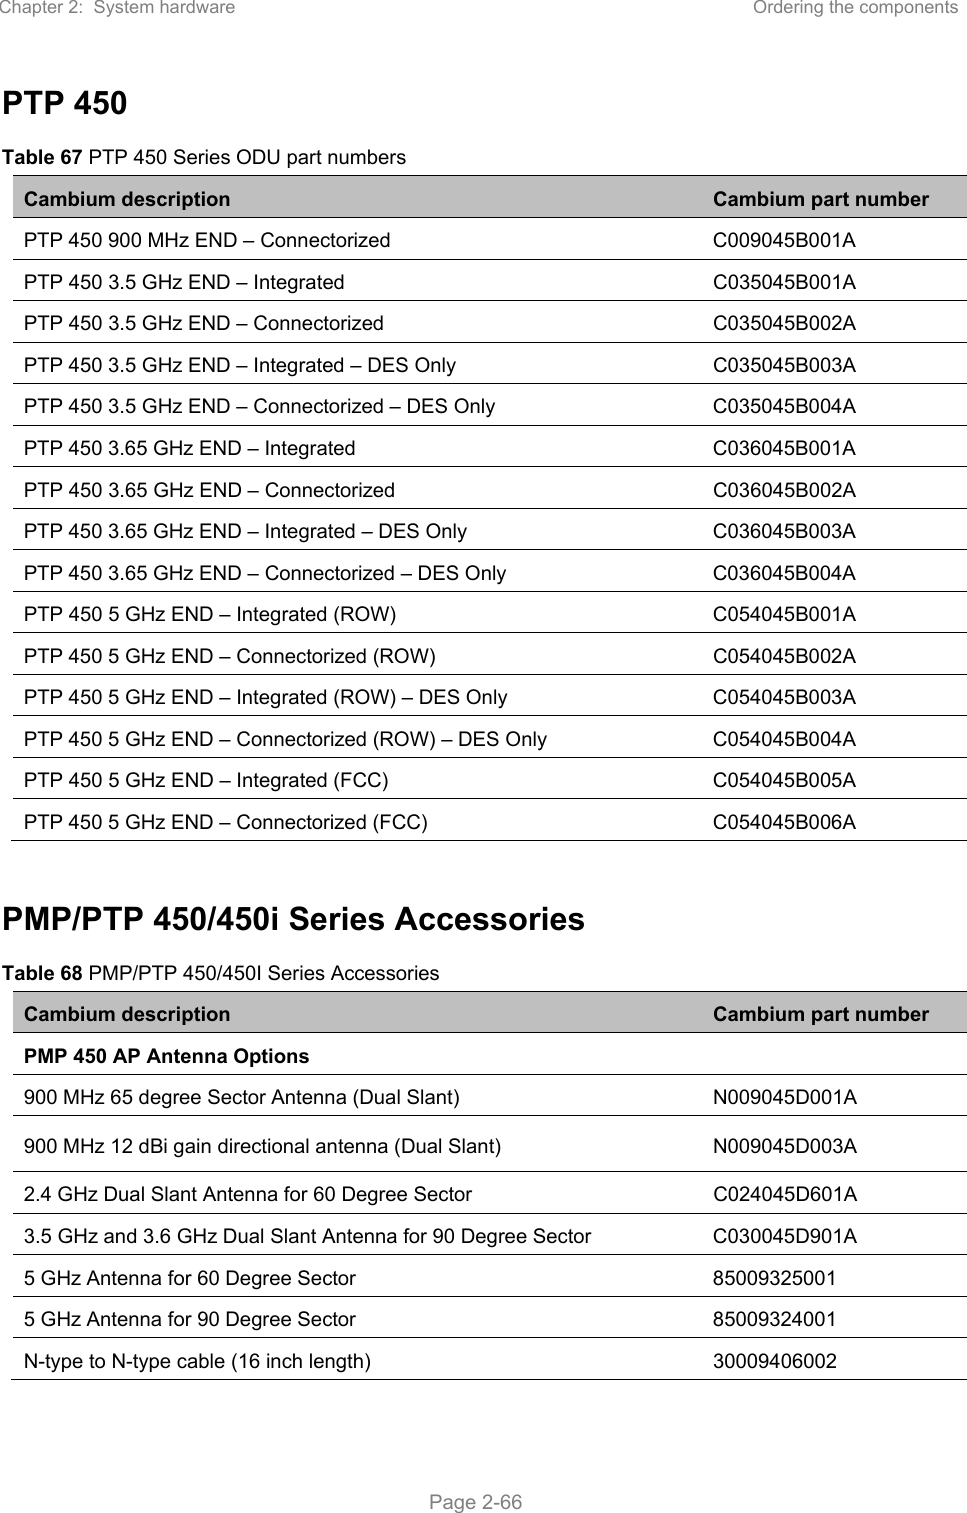 Chapter 2:  System hardware  Ordering the components   Page 2-66 PTP 450 Table 67 PTP 450 Series ODU part numbers Cambium description  Cambium part number PTP 450 900 MHz END – Connectorized  C009045B001A PTP 450 3.5 GHz END – Integrated  C035045B001A PTP 450 3.5 GHz END – Connectorized  C035045B002A PTP 450 3.5 GHz END – Integrated – DES Only  C035045B003A PTP 450 3.5 GHz END – Connectorized – DES Only  C035045B004A PTP 450 3.65 GHz END – Integrated  C036045B001A PTP 450 3.65 GHz END – Connectorized  C036045B002A PTP 450 3.65 GHz END – Integrated – DES Only  C036045B003A PTP 450 3.65 GHz END – Connectorized – DES Only  C036045B004A PTP 450 5 GHz END – Integrated (ROW)  C054045B001A PTP 450 5 GHz END – Connectorized (ROW)  C054045B002A PTP 450 5 GHz END – Integrated (ROW) – DES Only  C054045B003A PTP 450 5 GHz END – Connectorized (ROW) – DES Only  C054045B004A PTP 450 5 GHz END – Integrated (FCC)  C054045B005A PTP 450 5 GHz END – Connectorized (FCC)  C054045B006A  PMP/PTP 450/450i Series Accessories Table 68 PMP/PTP 450/450I Series Accessories Cambium description  Cambium part number PMP 450 AP Antenna Options   900 MHz 65 degree Sector Antenna (Dual Slant) N009045D001A 900 MHz 12 dBi gain directional antenna (Dual Slant) N009045D003A 2.4 GHz Dual Slant Antenna for 60 Degree Sector  C024045D601A 3.5 GHz and 3.6 GHz Dual Slant Antenna for 90 Degree Sector  C030045D901A 5 GHz Antenna for 60 Degree Sector  85009325001 5 GHz Antenna for 90 Degree Sector  85009324001 N-type to N-type cable (16 inch length)  30009406002 